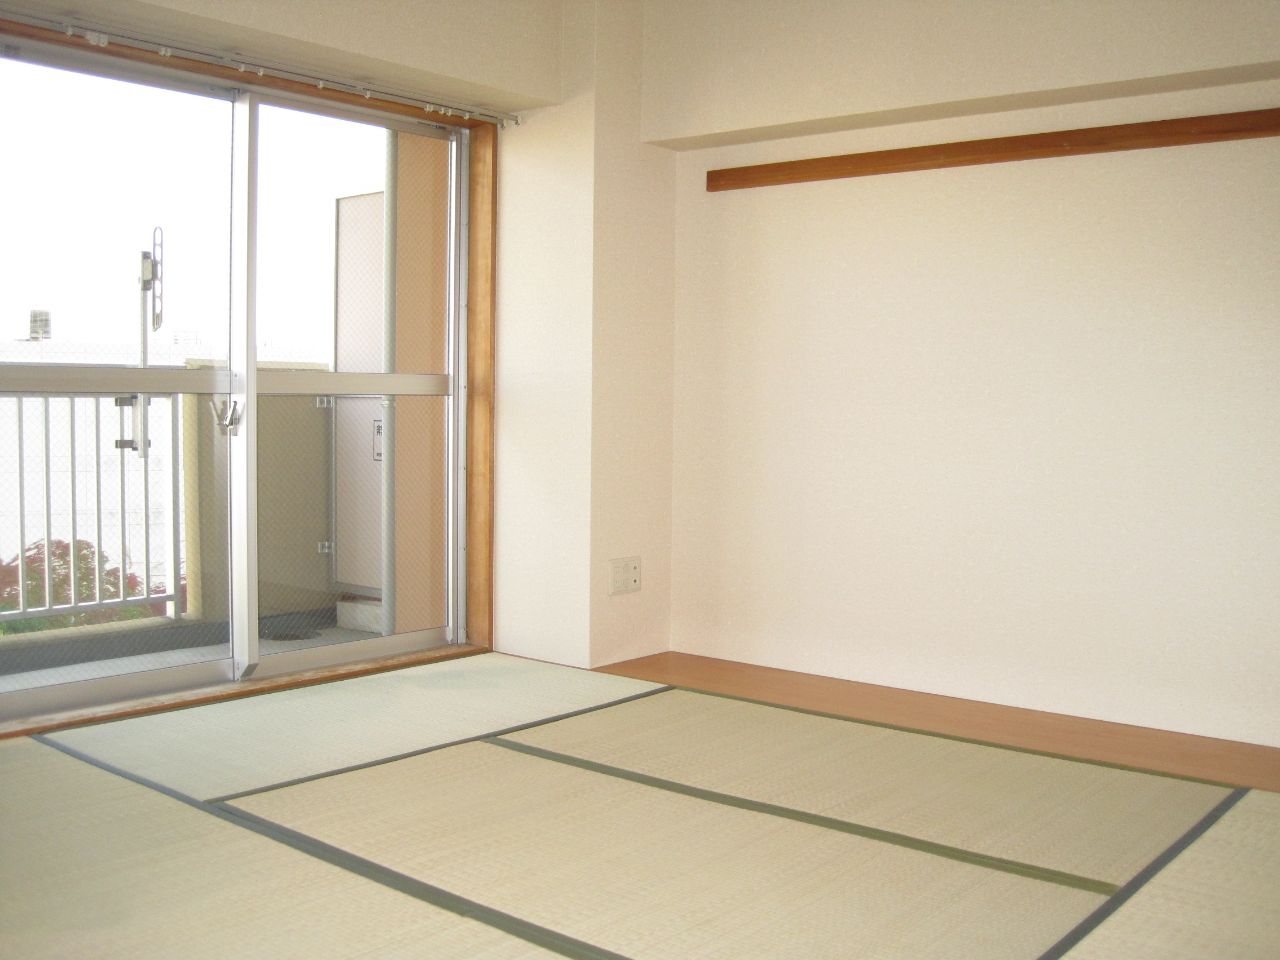 Other room space. Living next to the Japanese-style room